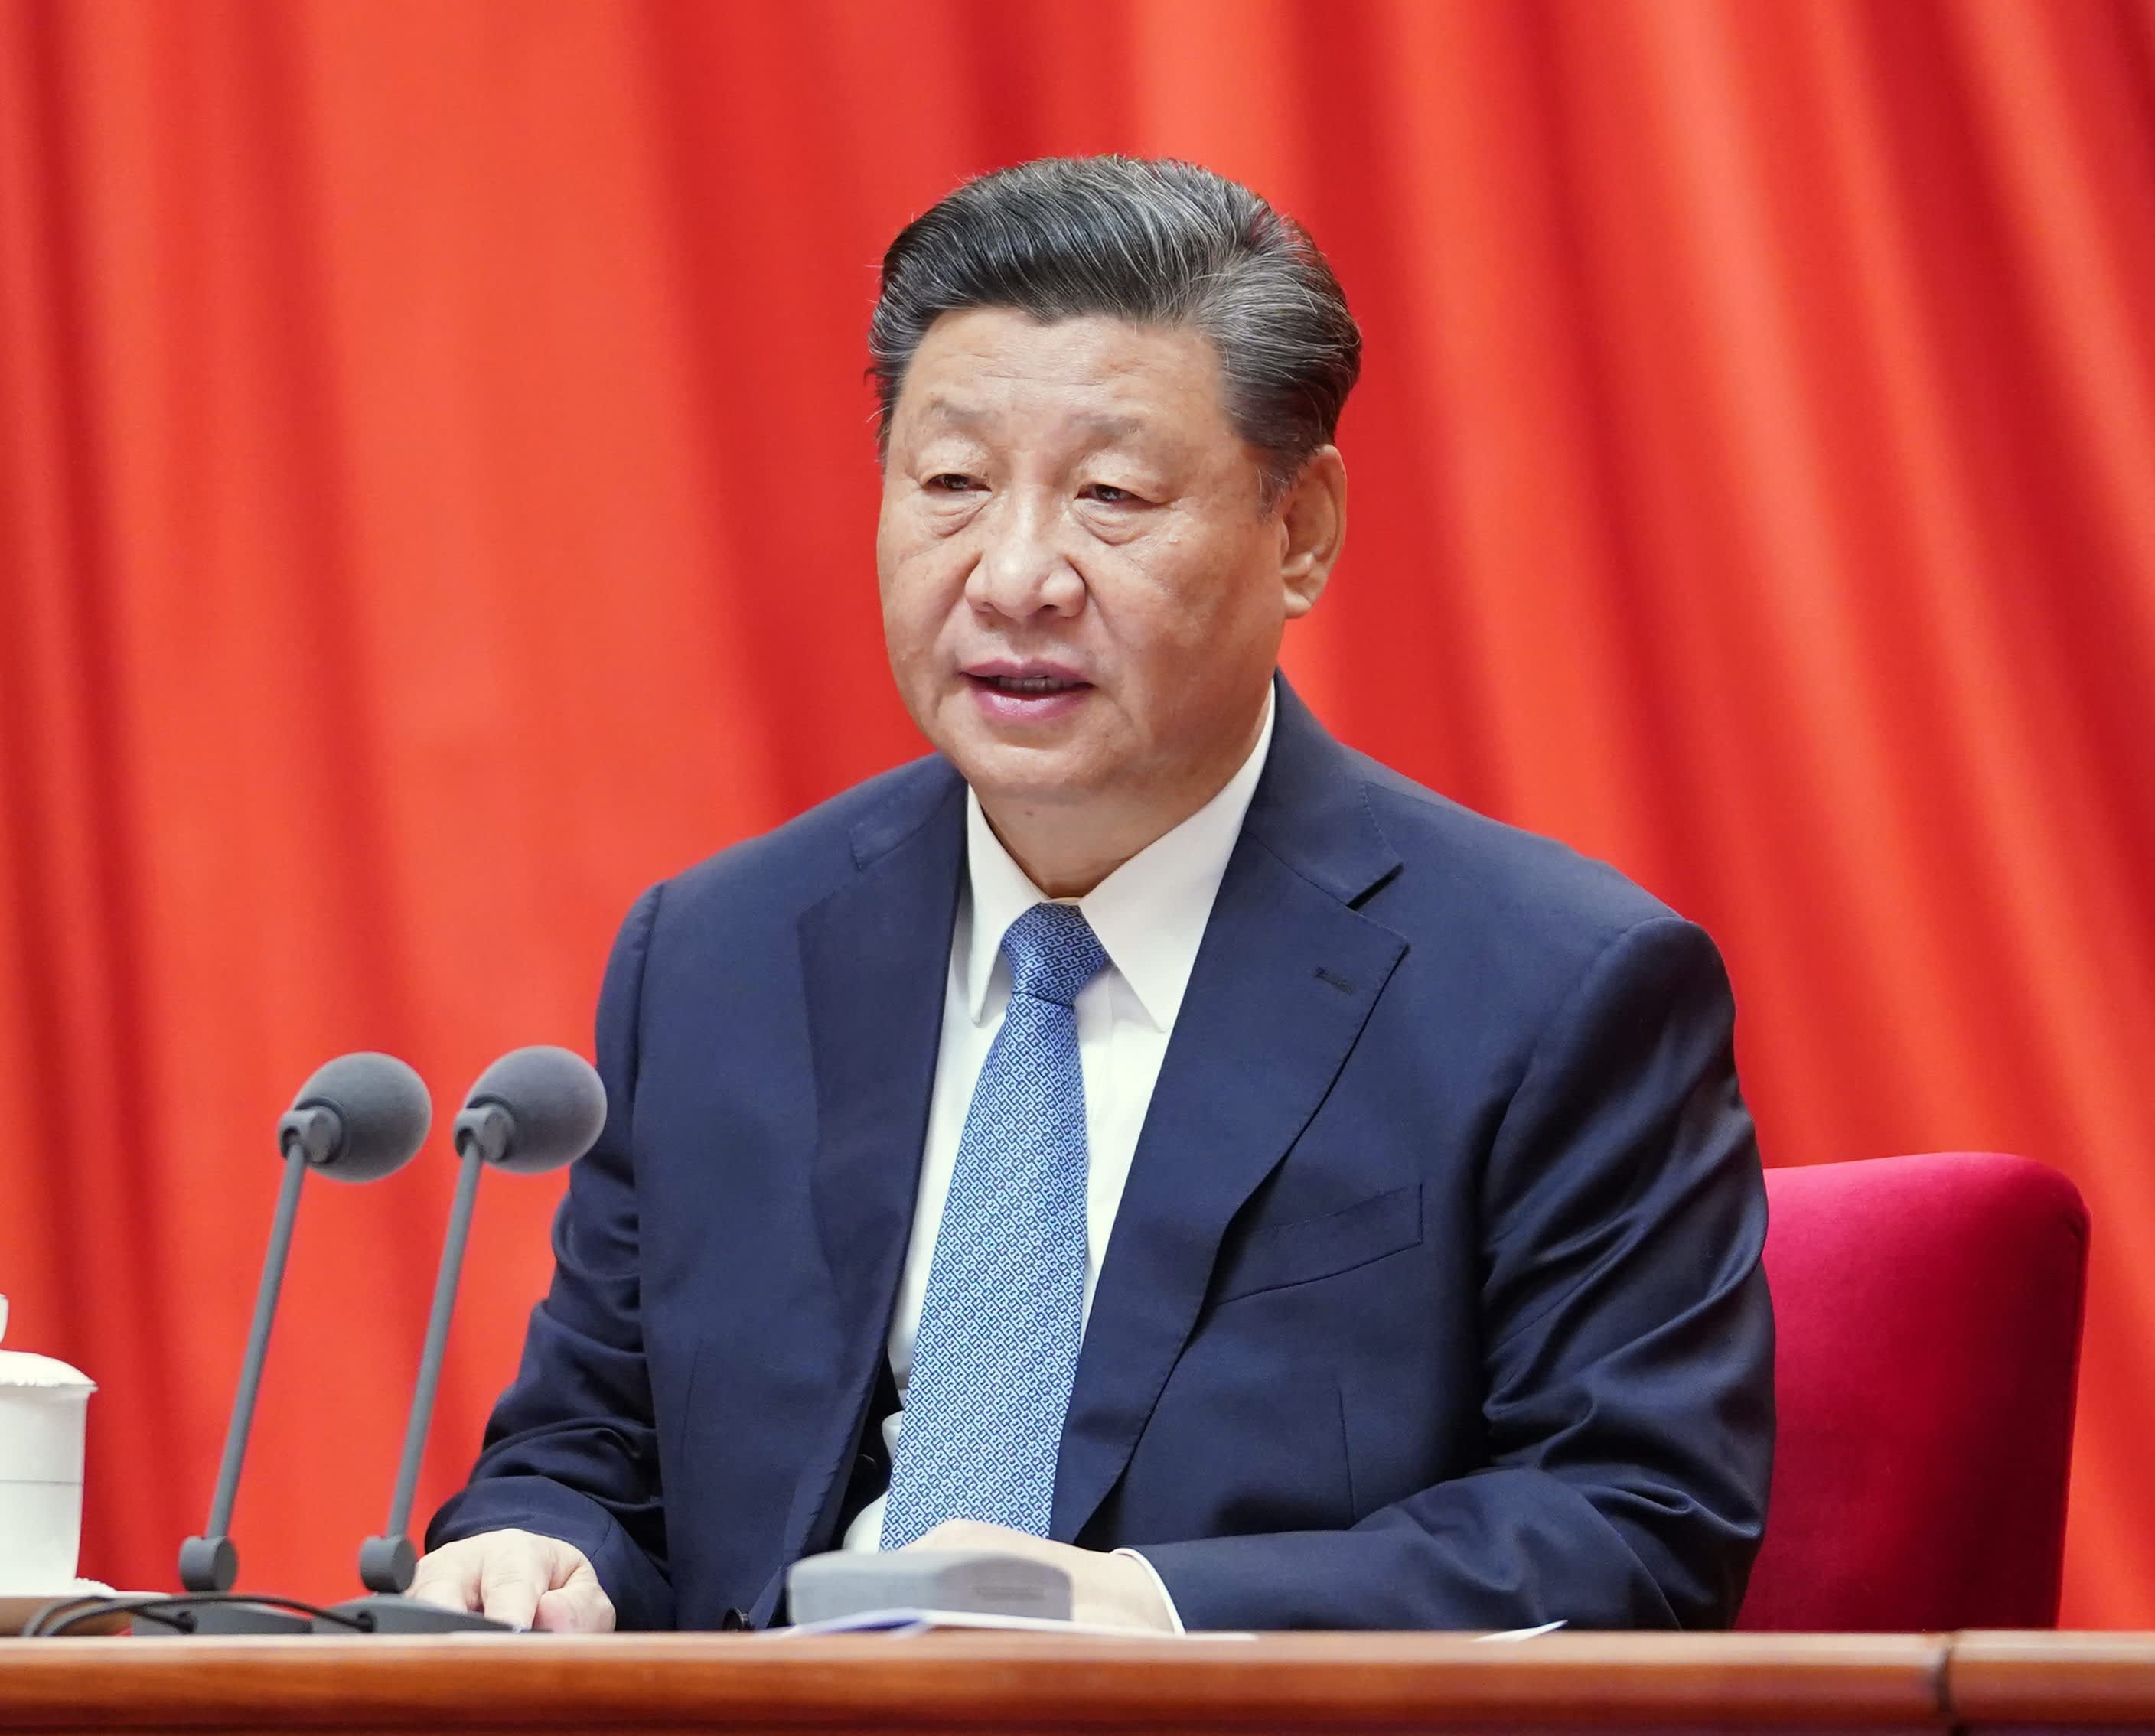 China’s Xi calls for unity in first remarks of Biden era, warns against ‘arrogant isolation'